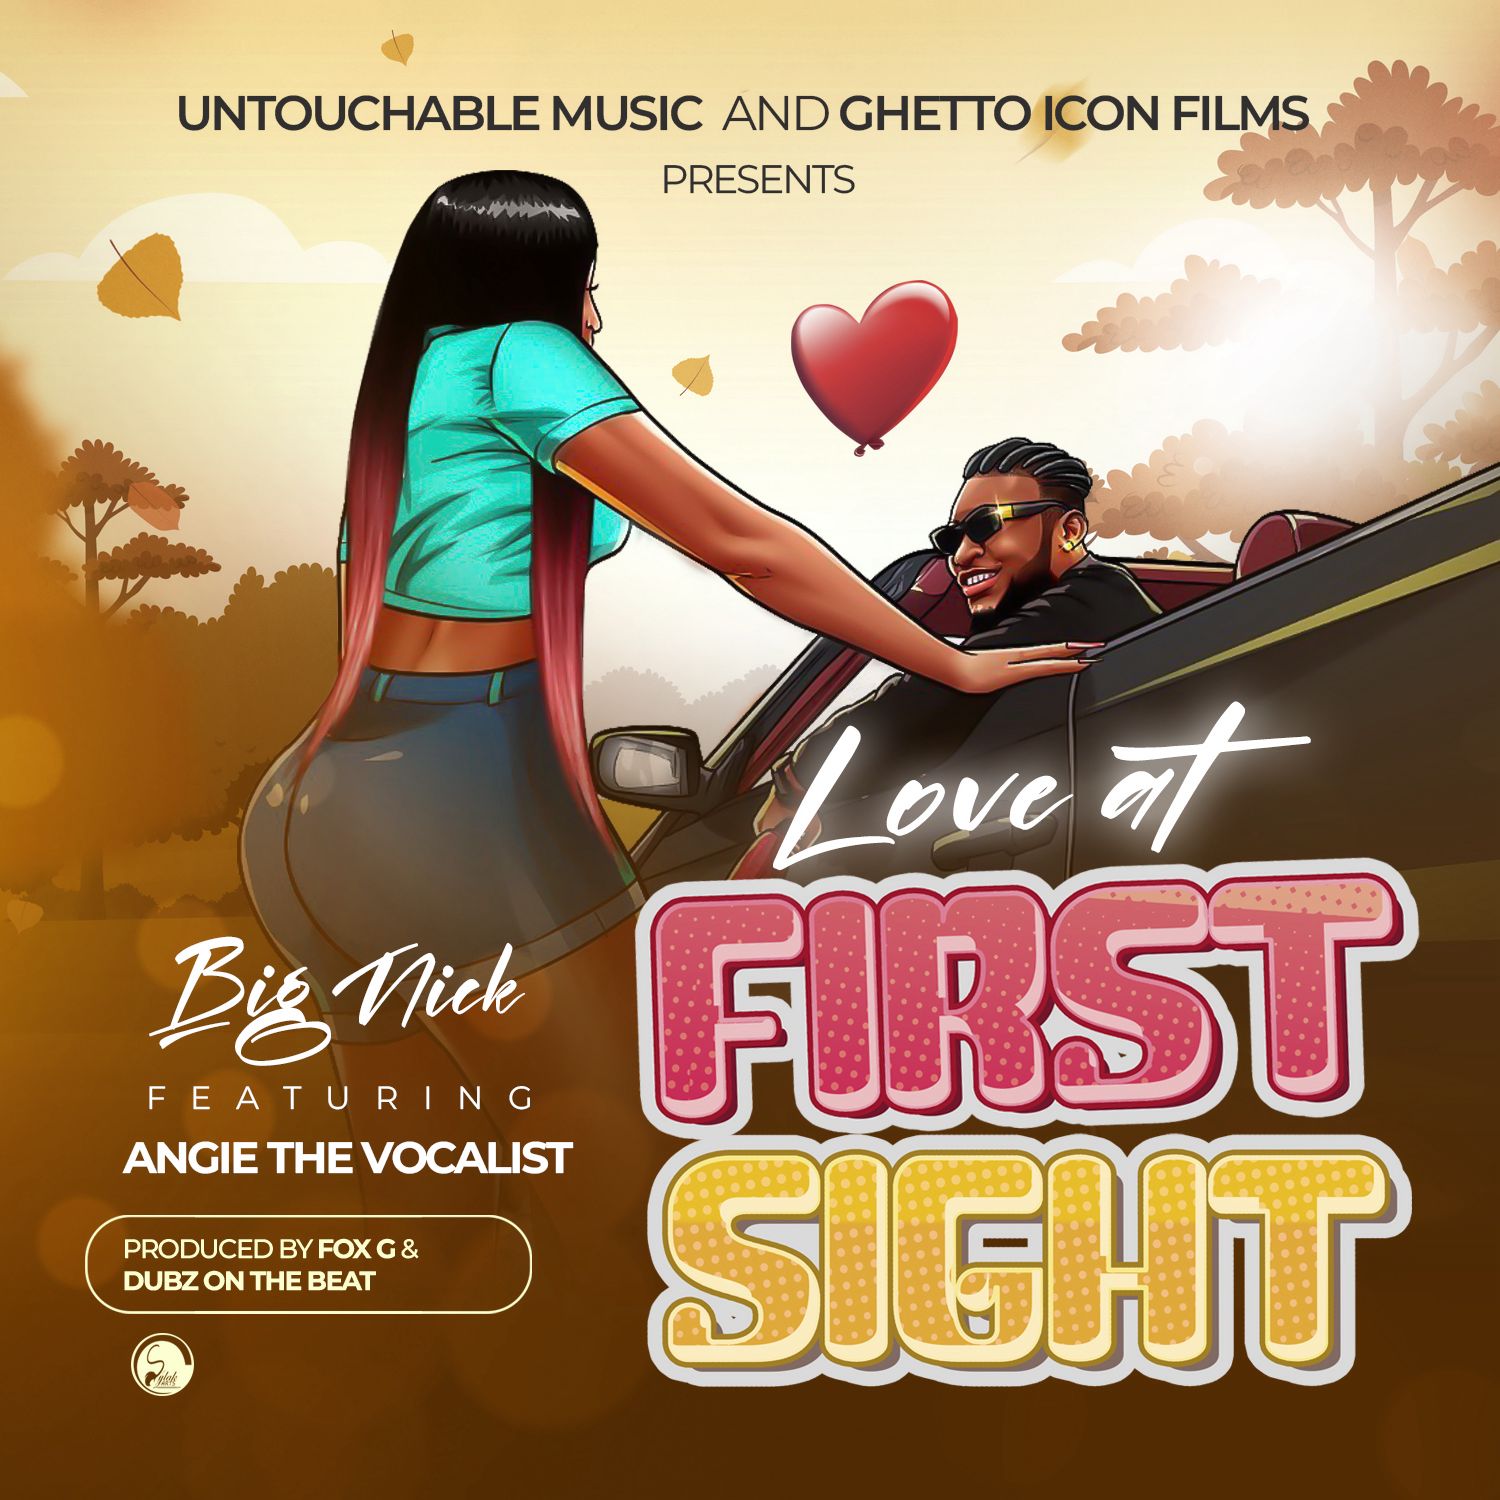 Big-Nick-ft-Angie-The-Vocalist-Love-At-First-Sight-prod-by-Dubz-n-fox-G